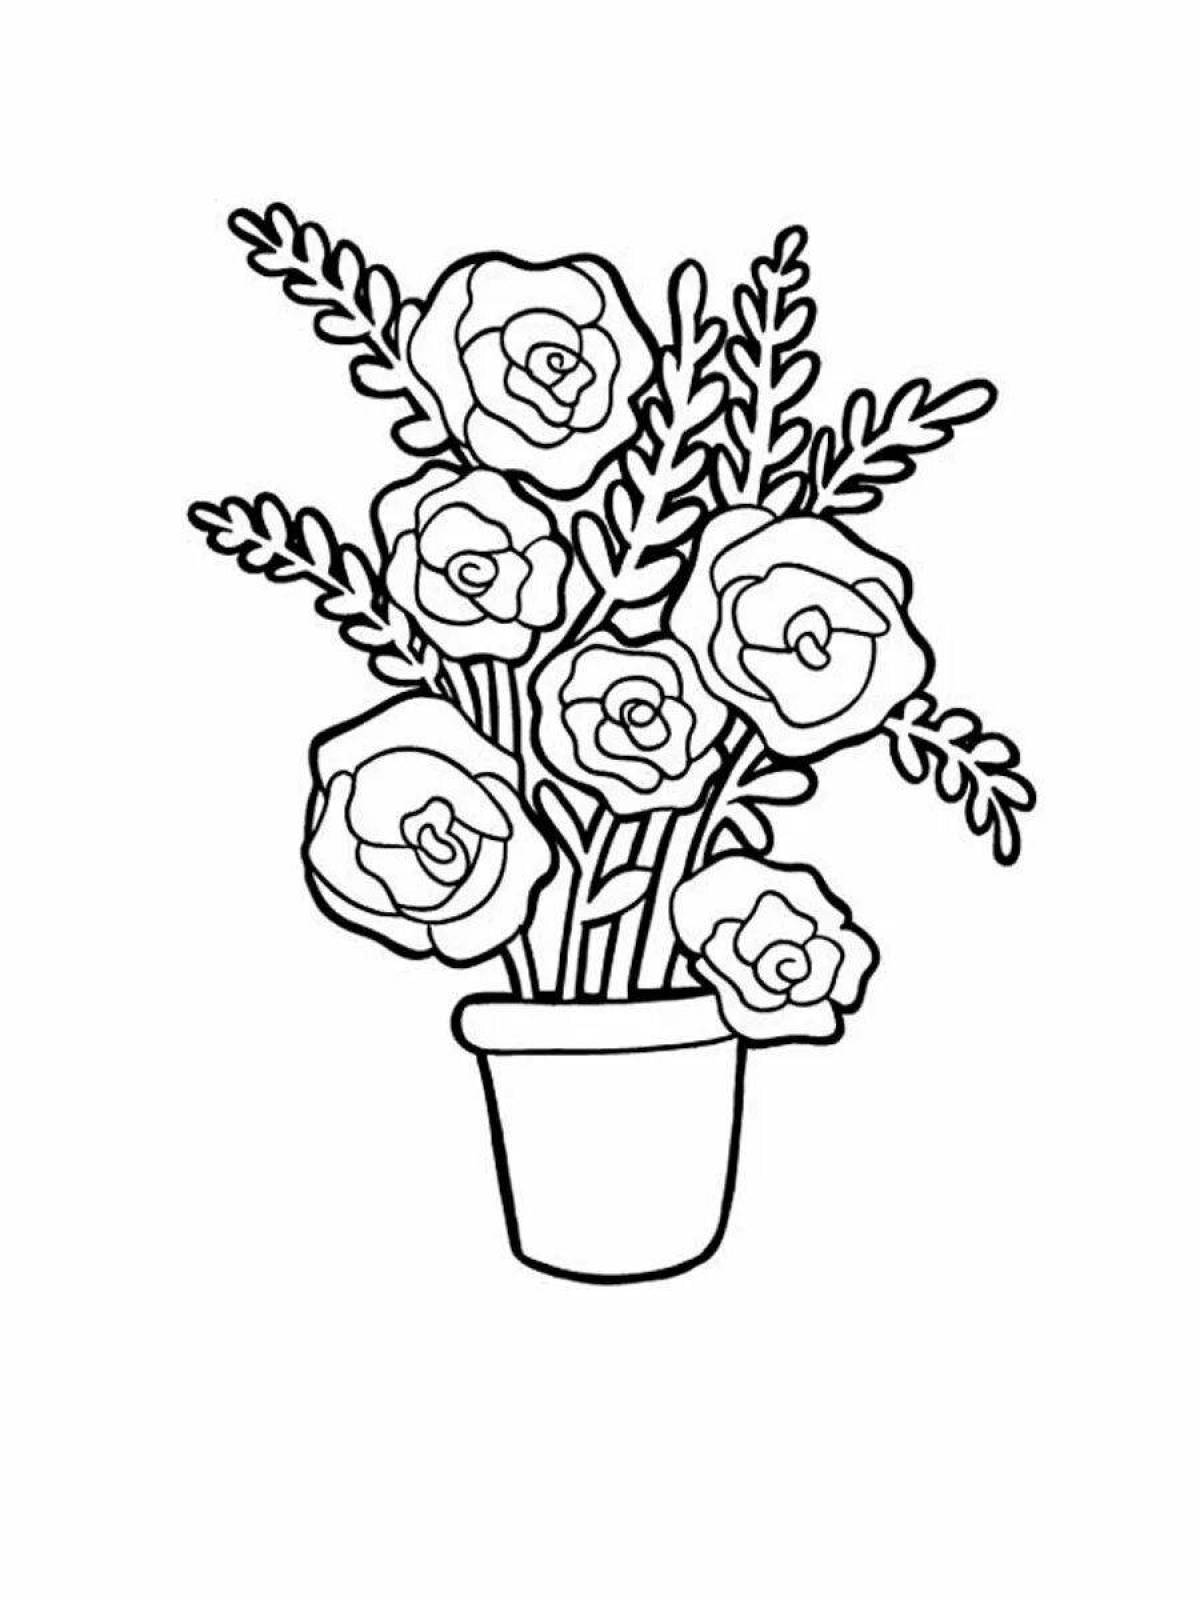 Coloring page charming winter bouquet